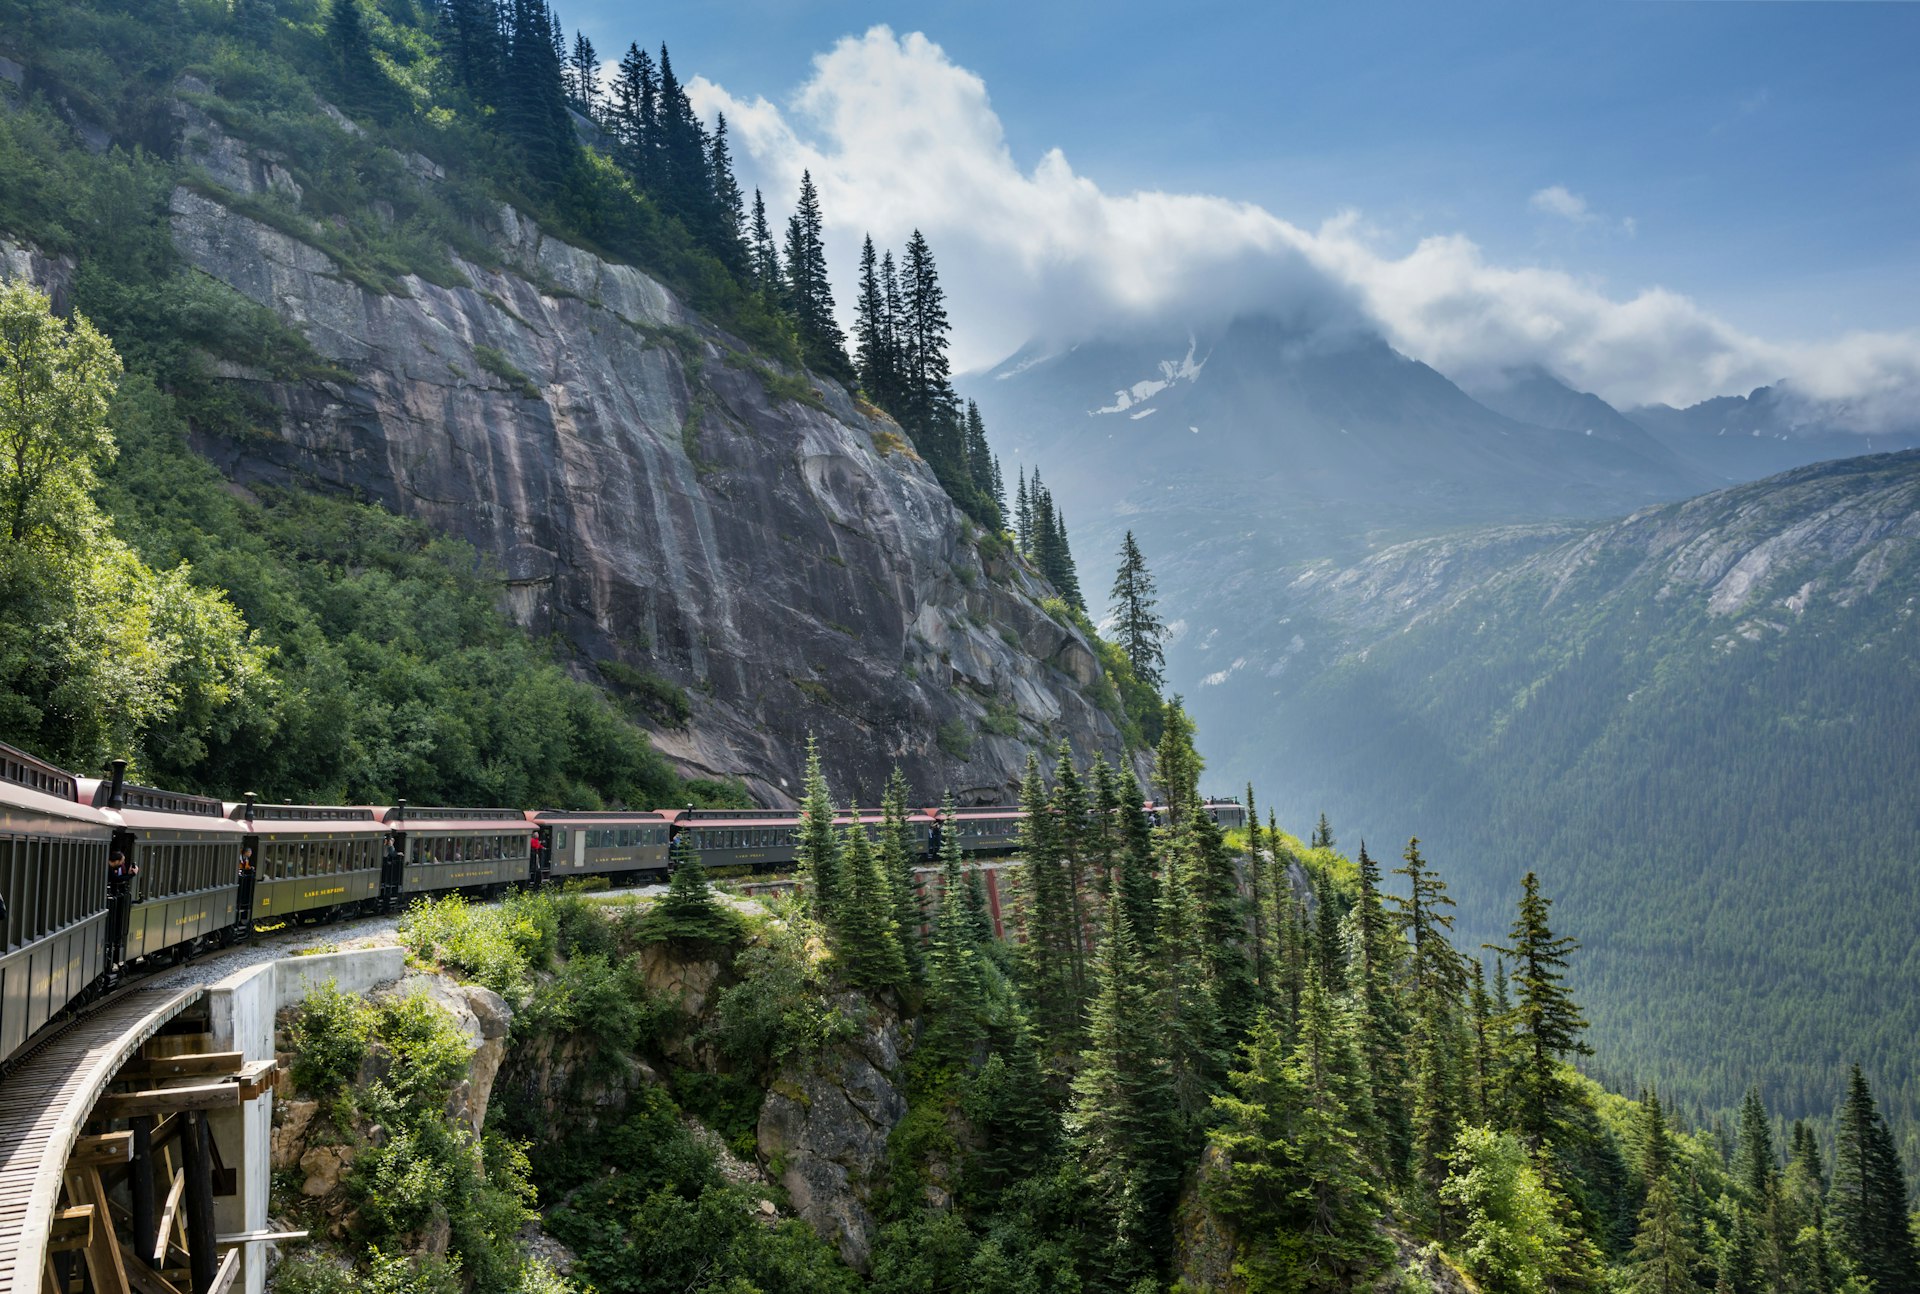 A heritage train hugs the cliff edge in a mountainous area